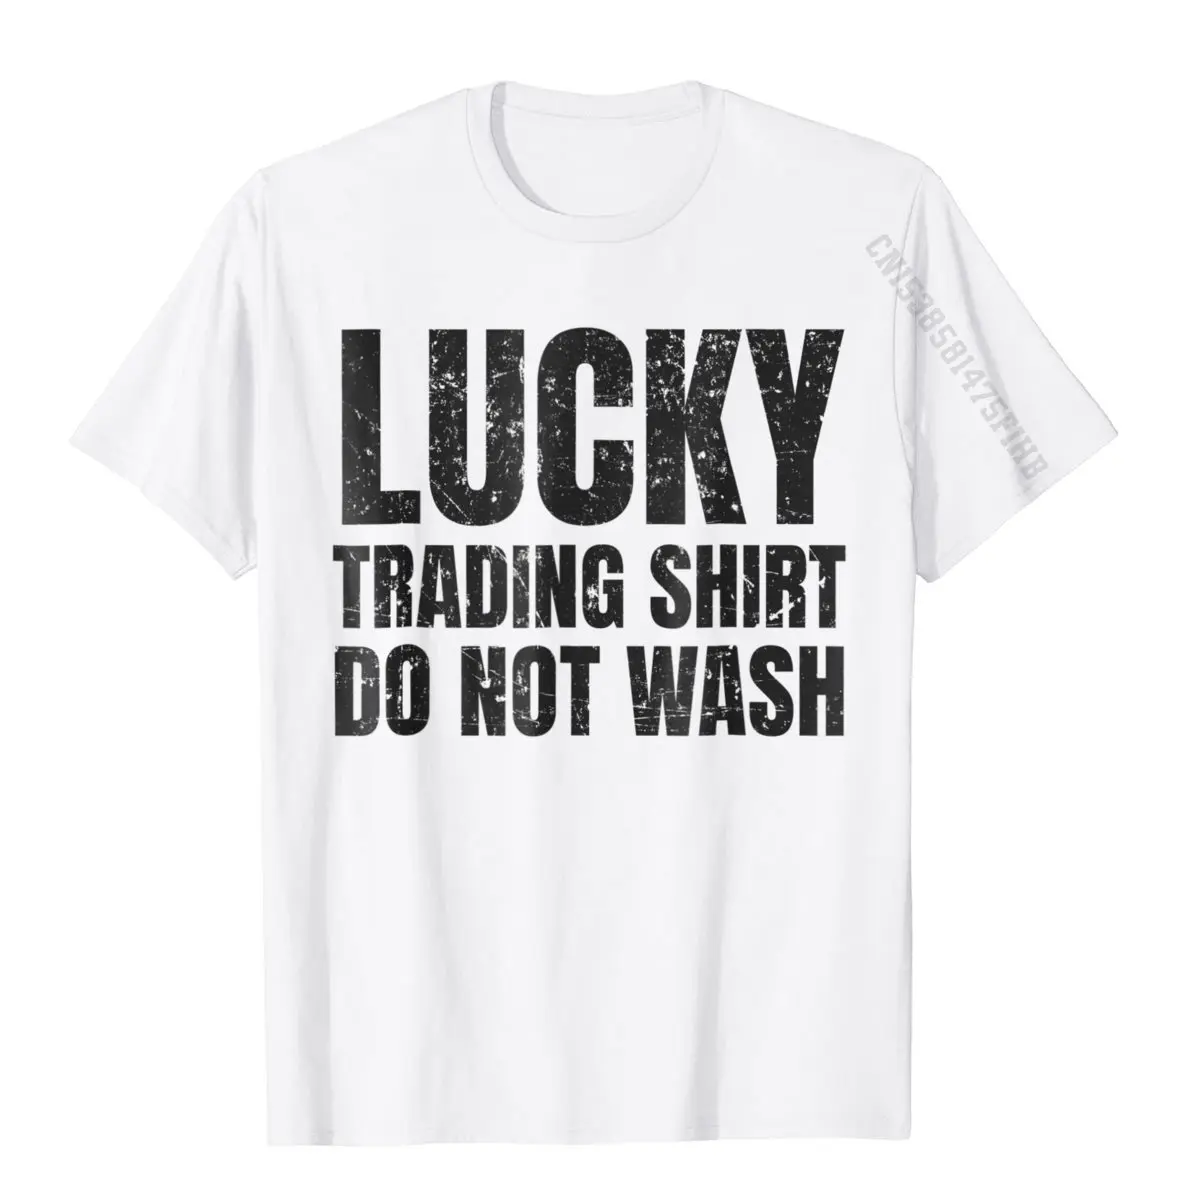 Lucking Trading Shirt Funny Stock Market Traders Gift Wholesale Young Top T-Shirts Cotton Tops Shirts Casual